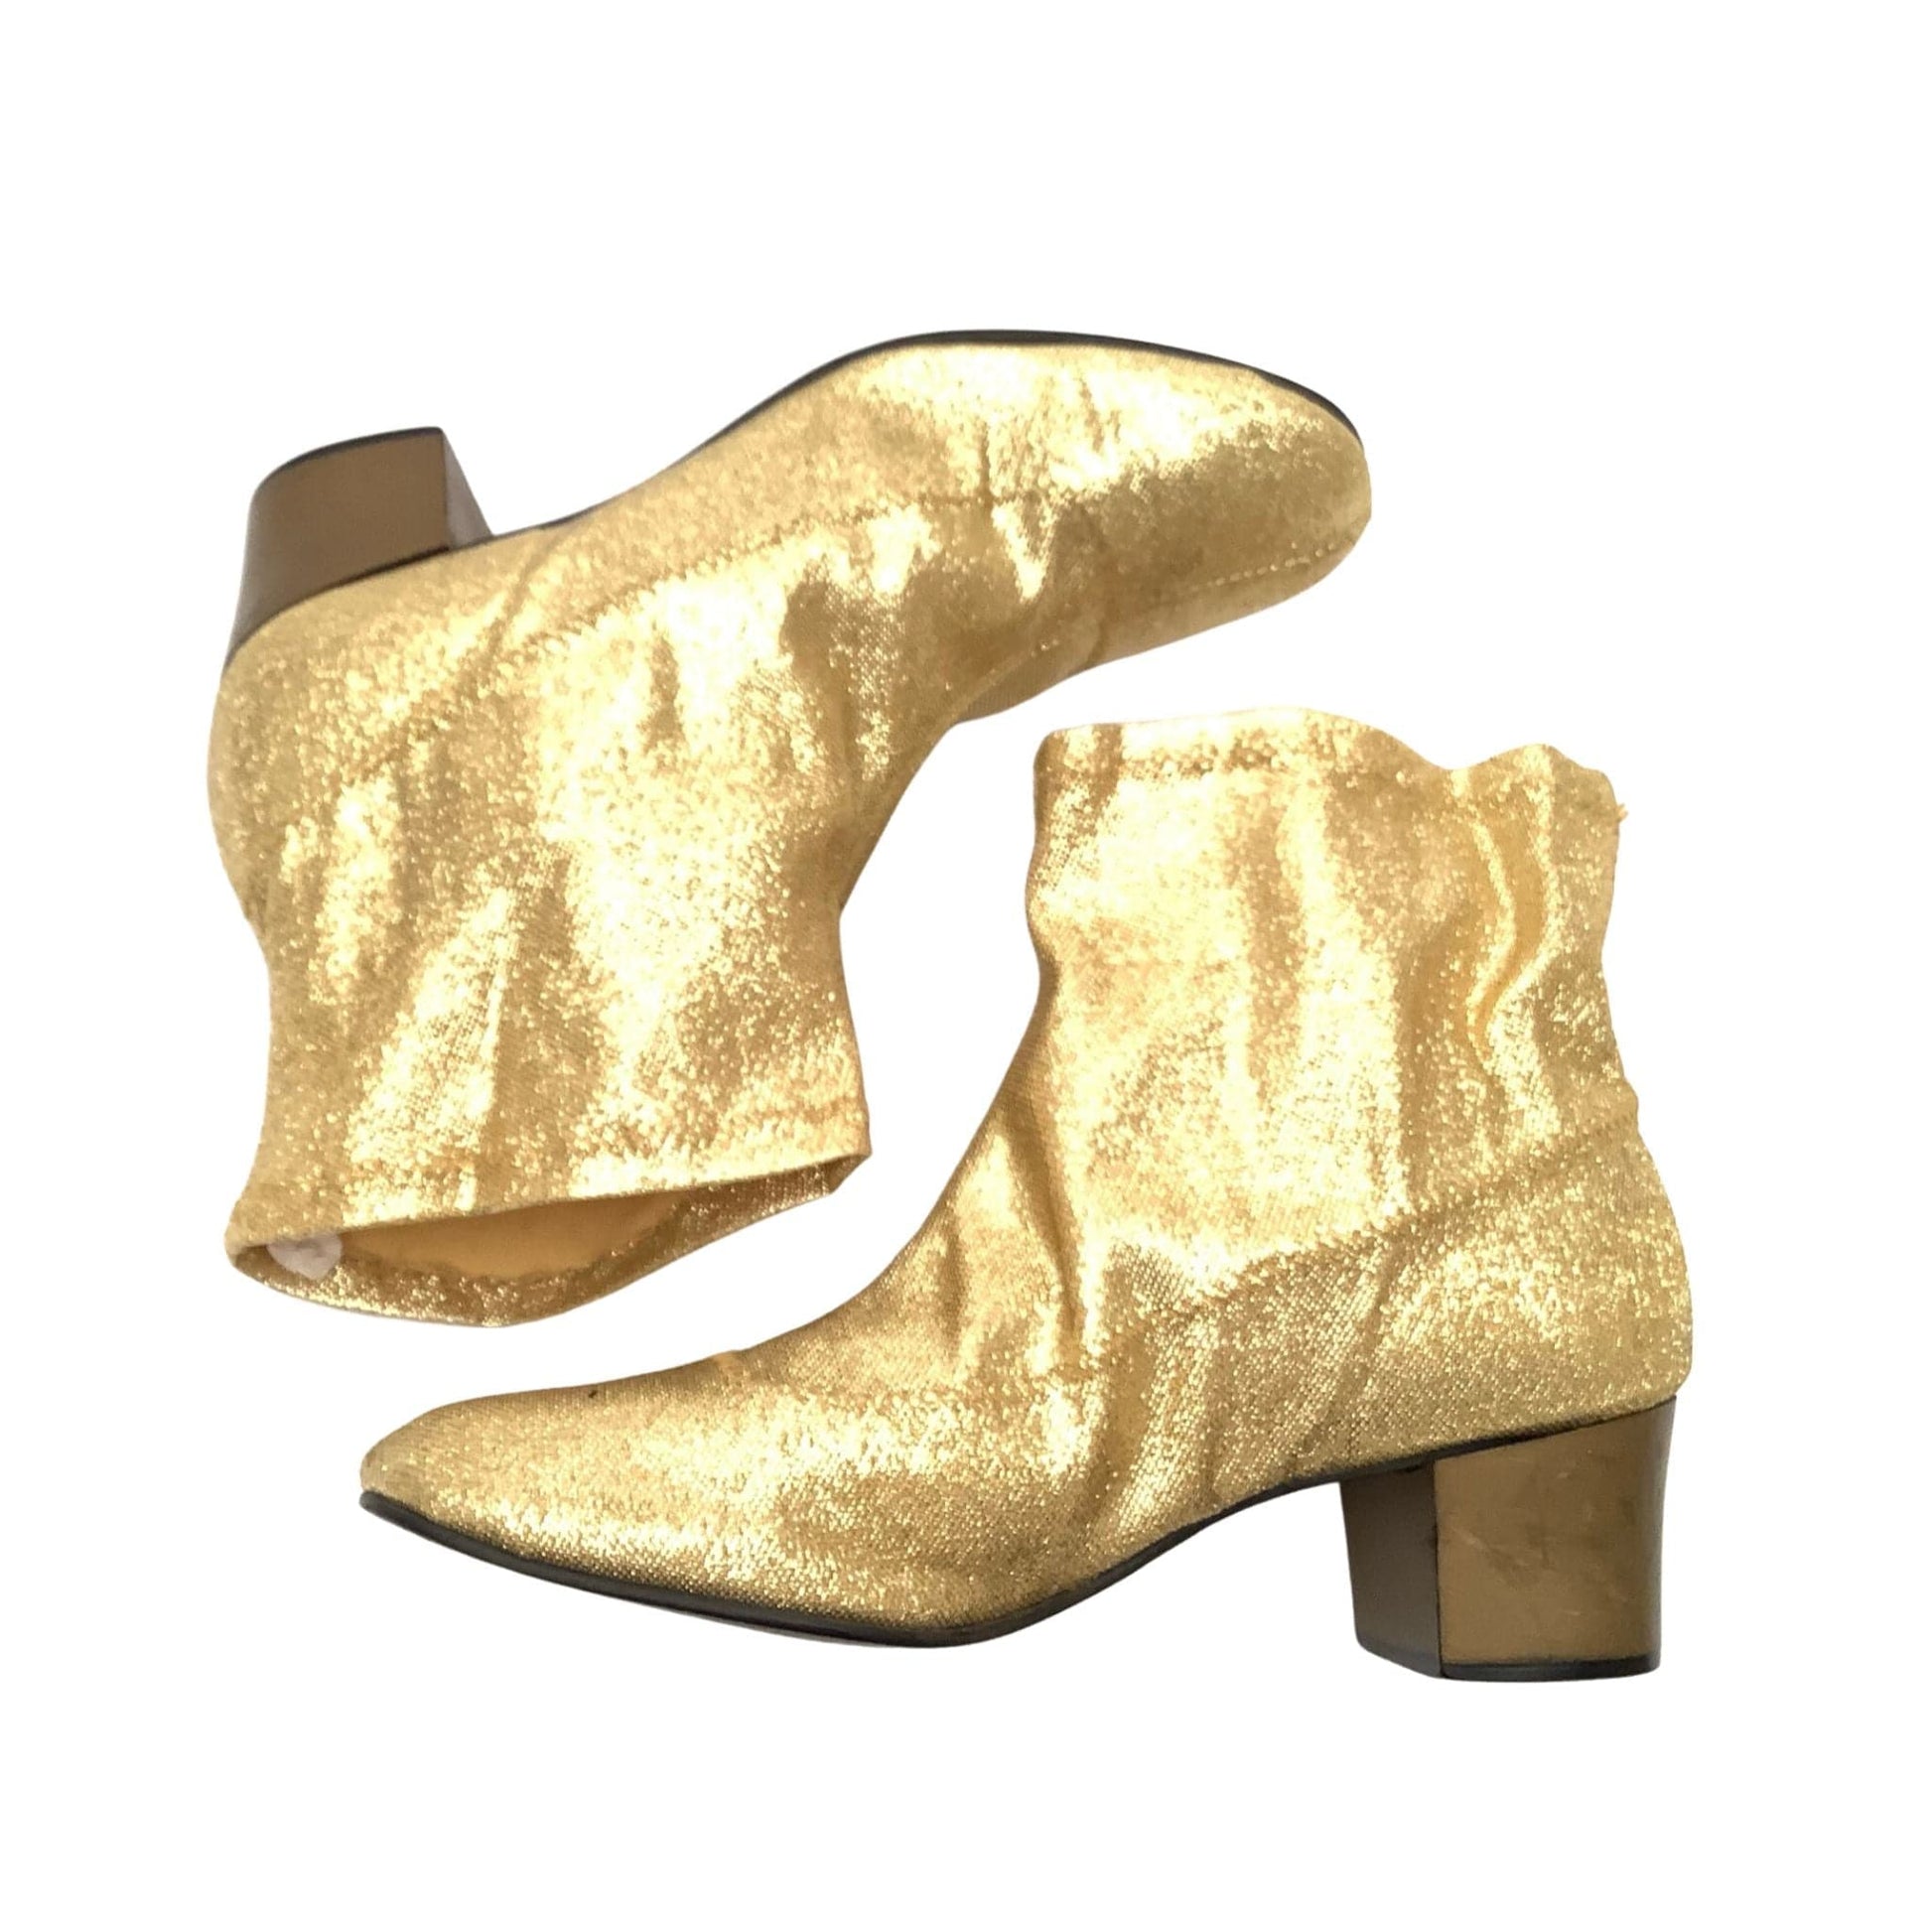 1960s GoGo Gold Booties 6.5 / Gold / Vintage 1960s